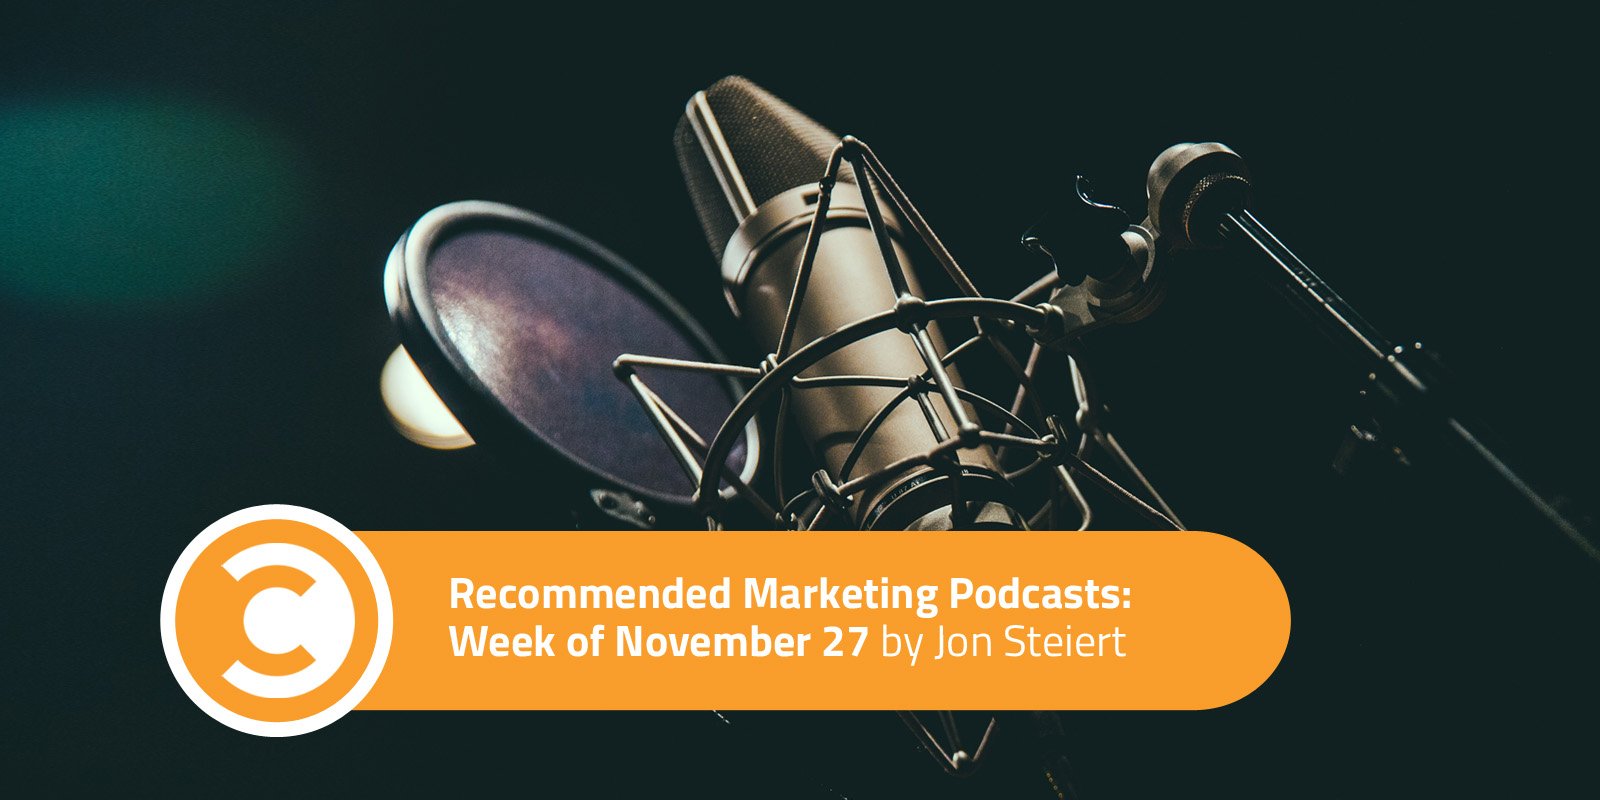 Recommended Marketing Podcasts Week of November 27